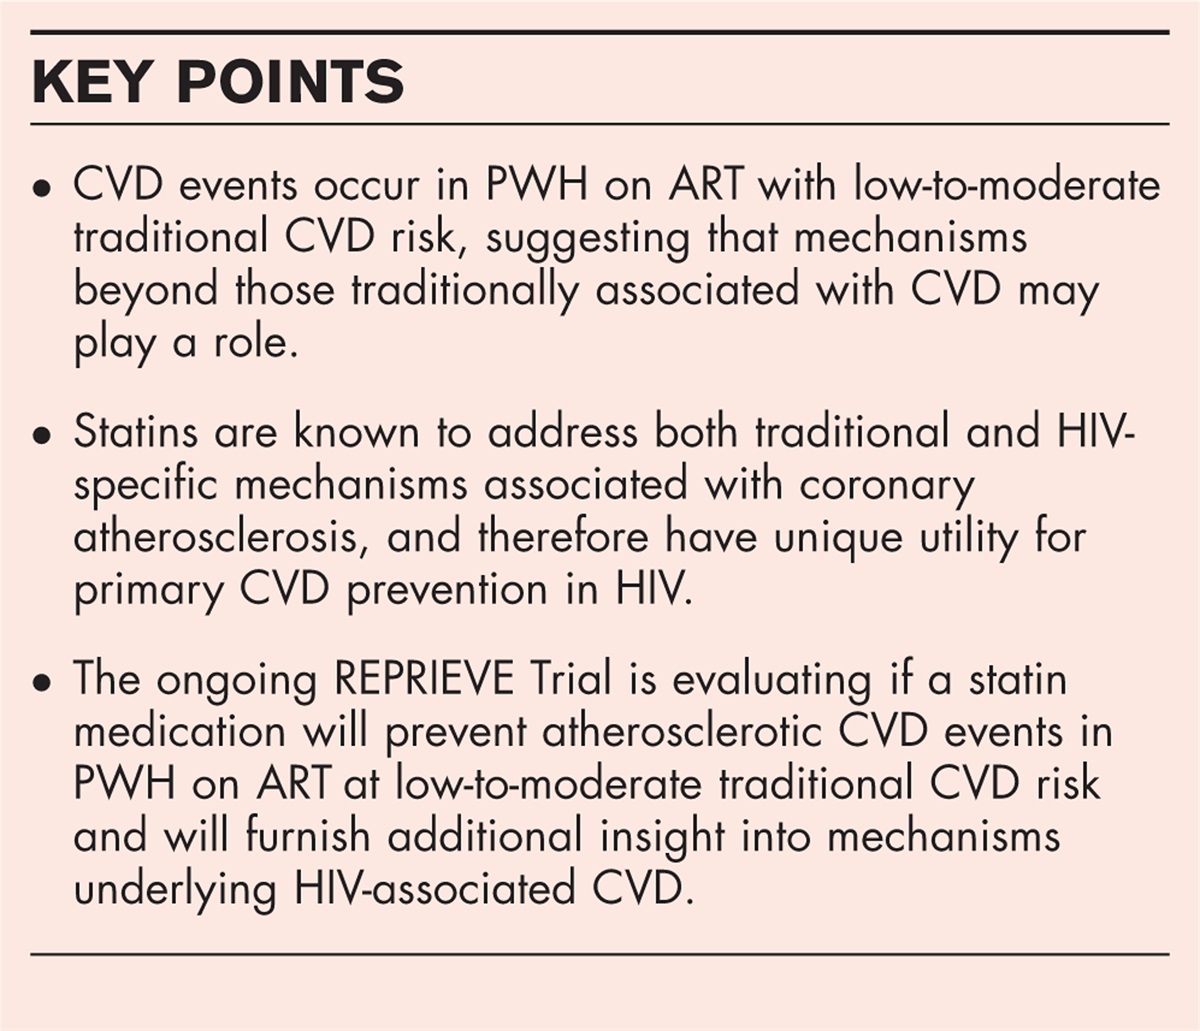 Statins for primary cardiovascular disease prevention among people with HIV: emergent directions